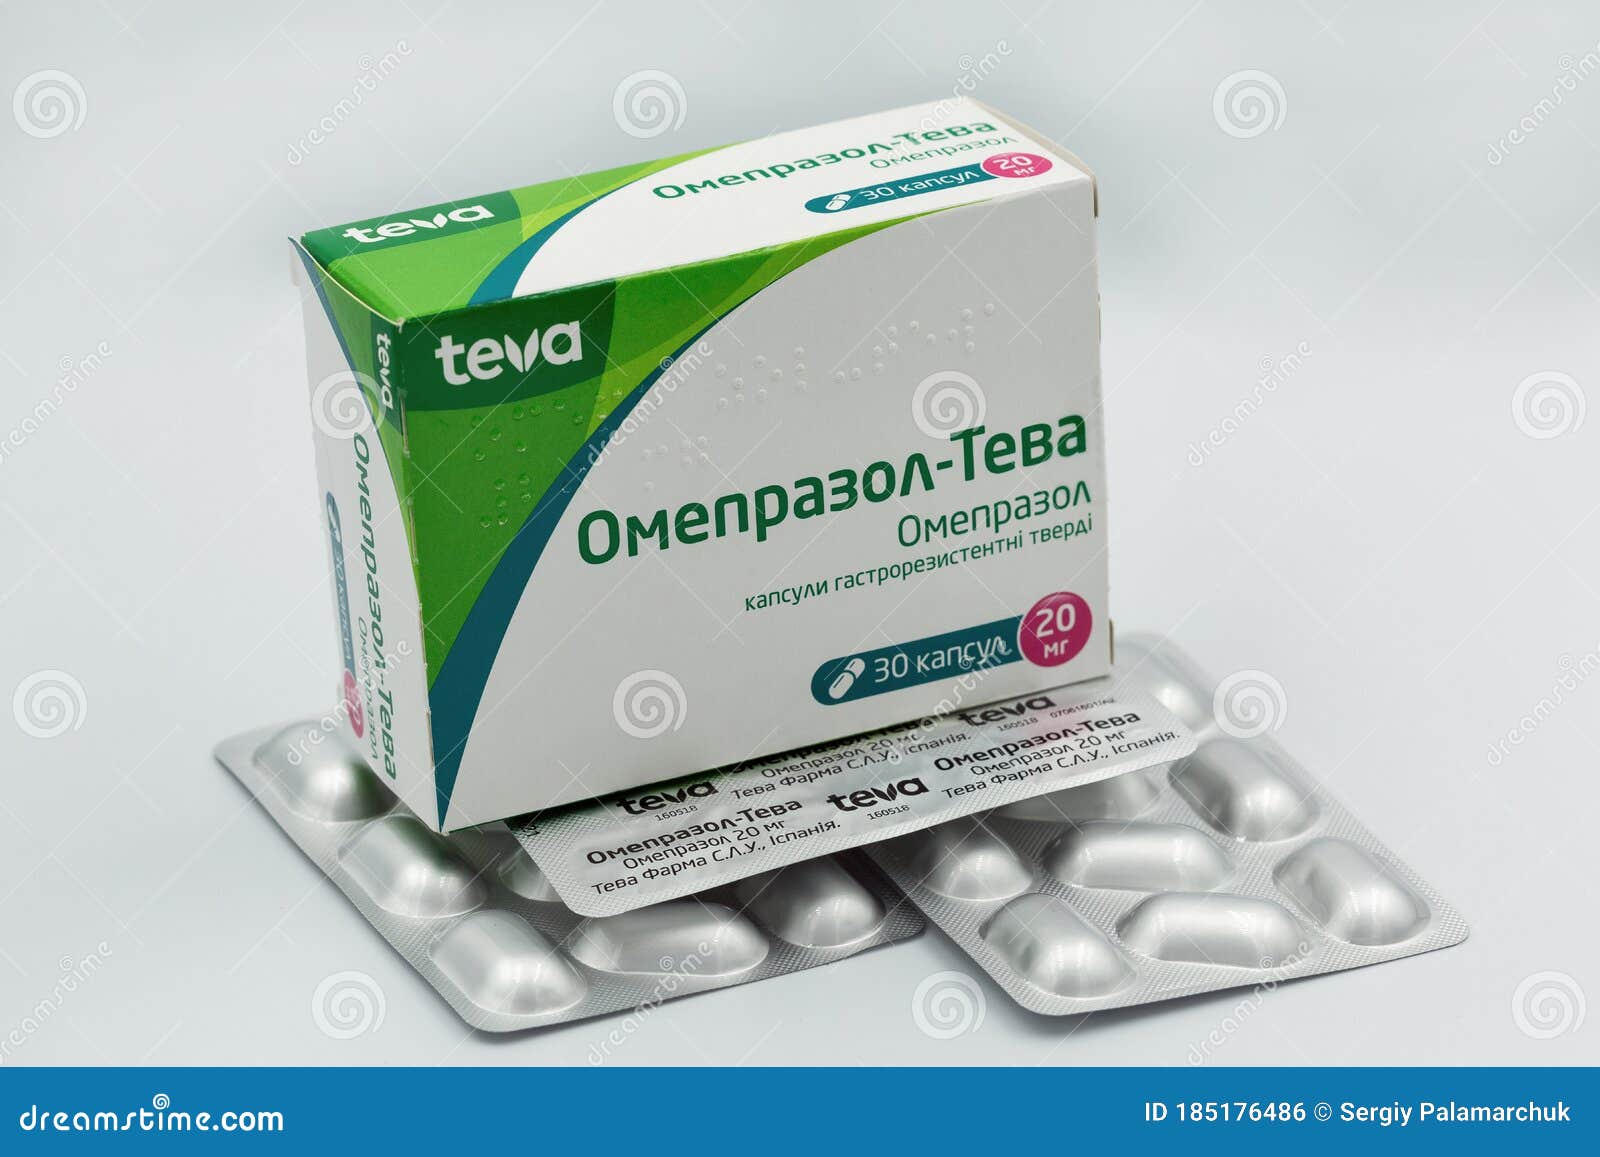 fange Eftermæle gave Omeprazole Generic Drug Box by Teva Closeup Against White Editorial Photo -  Image of cure, health: 185176486